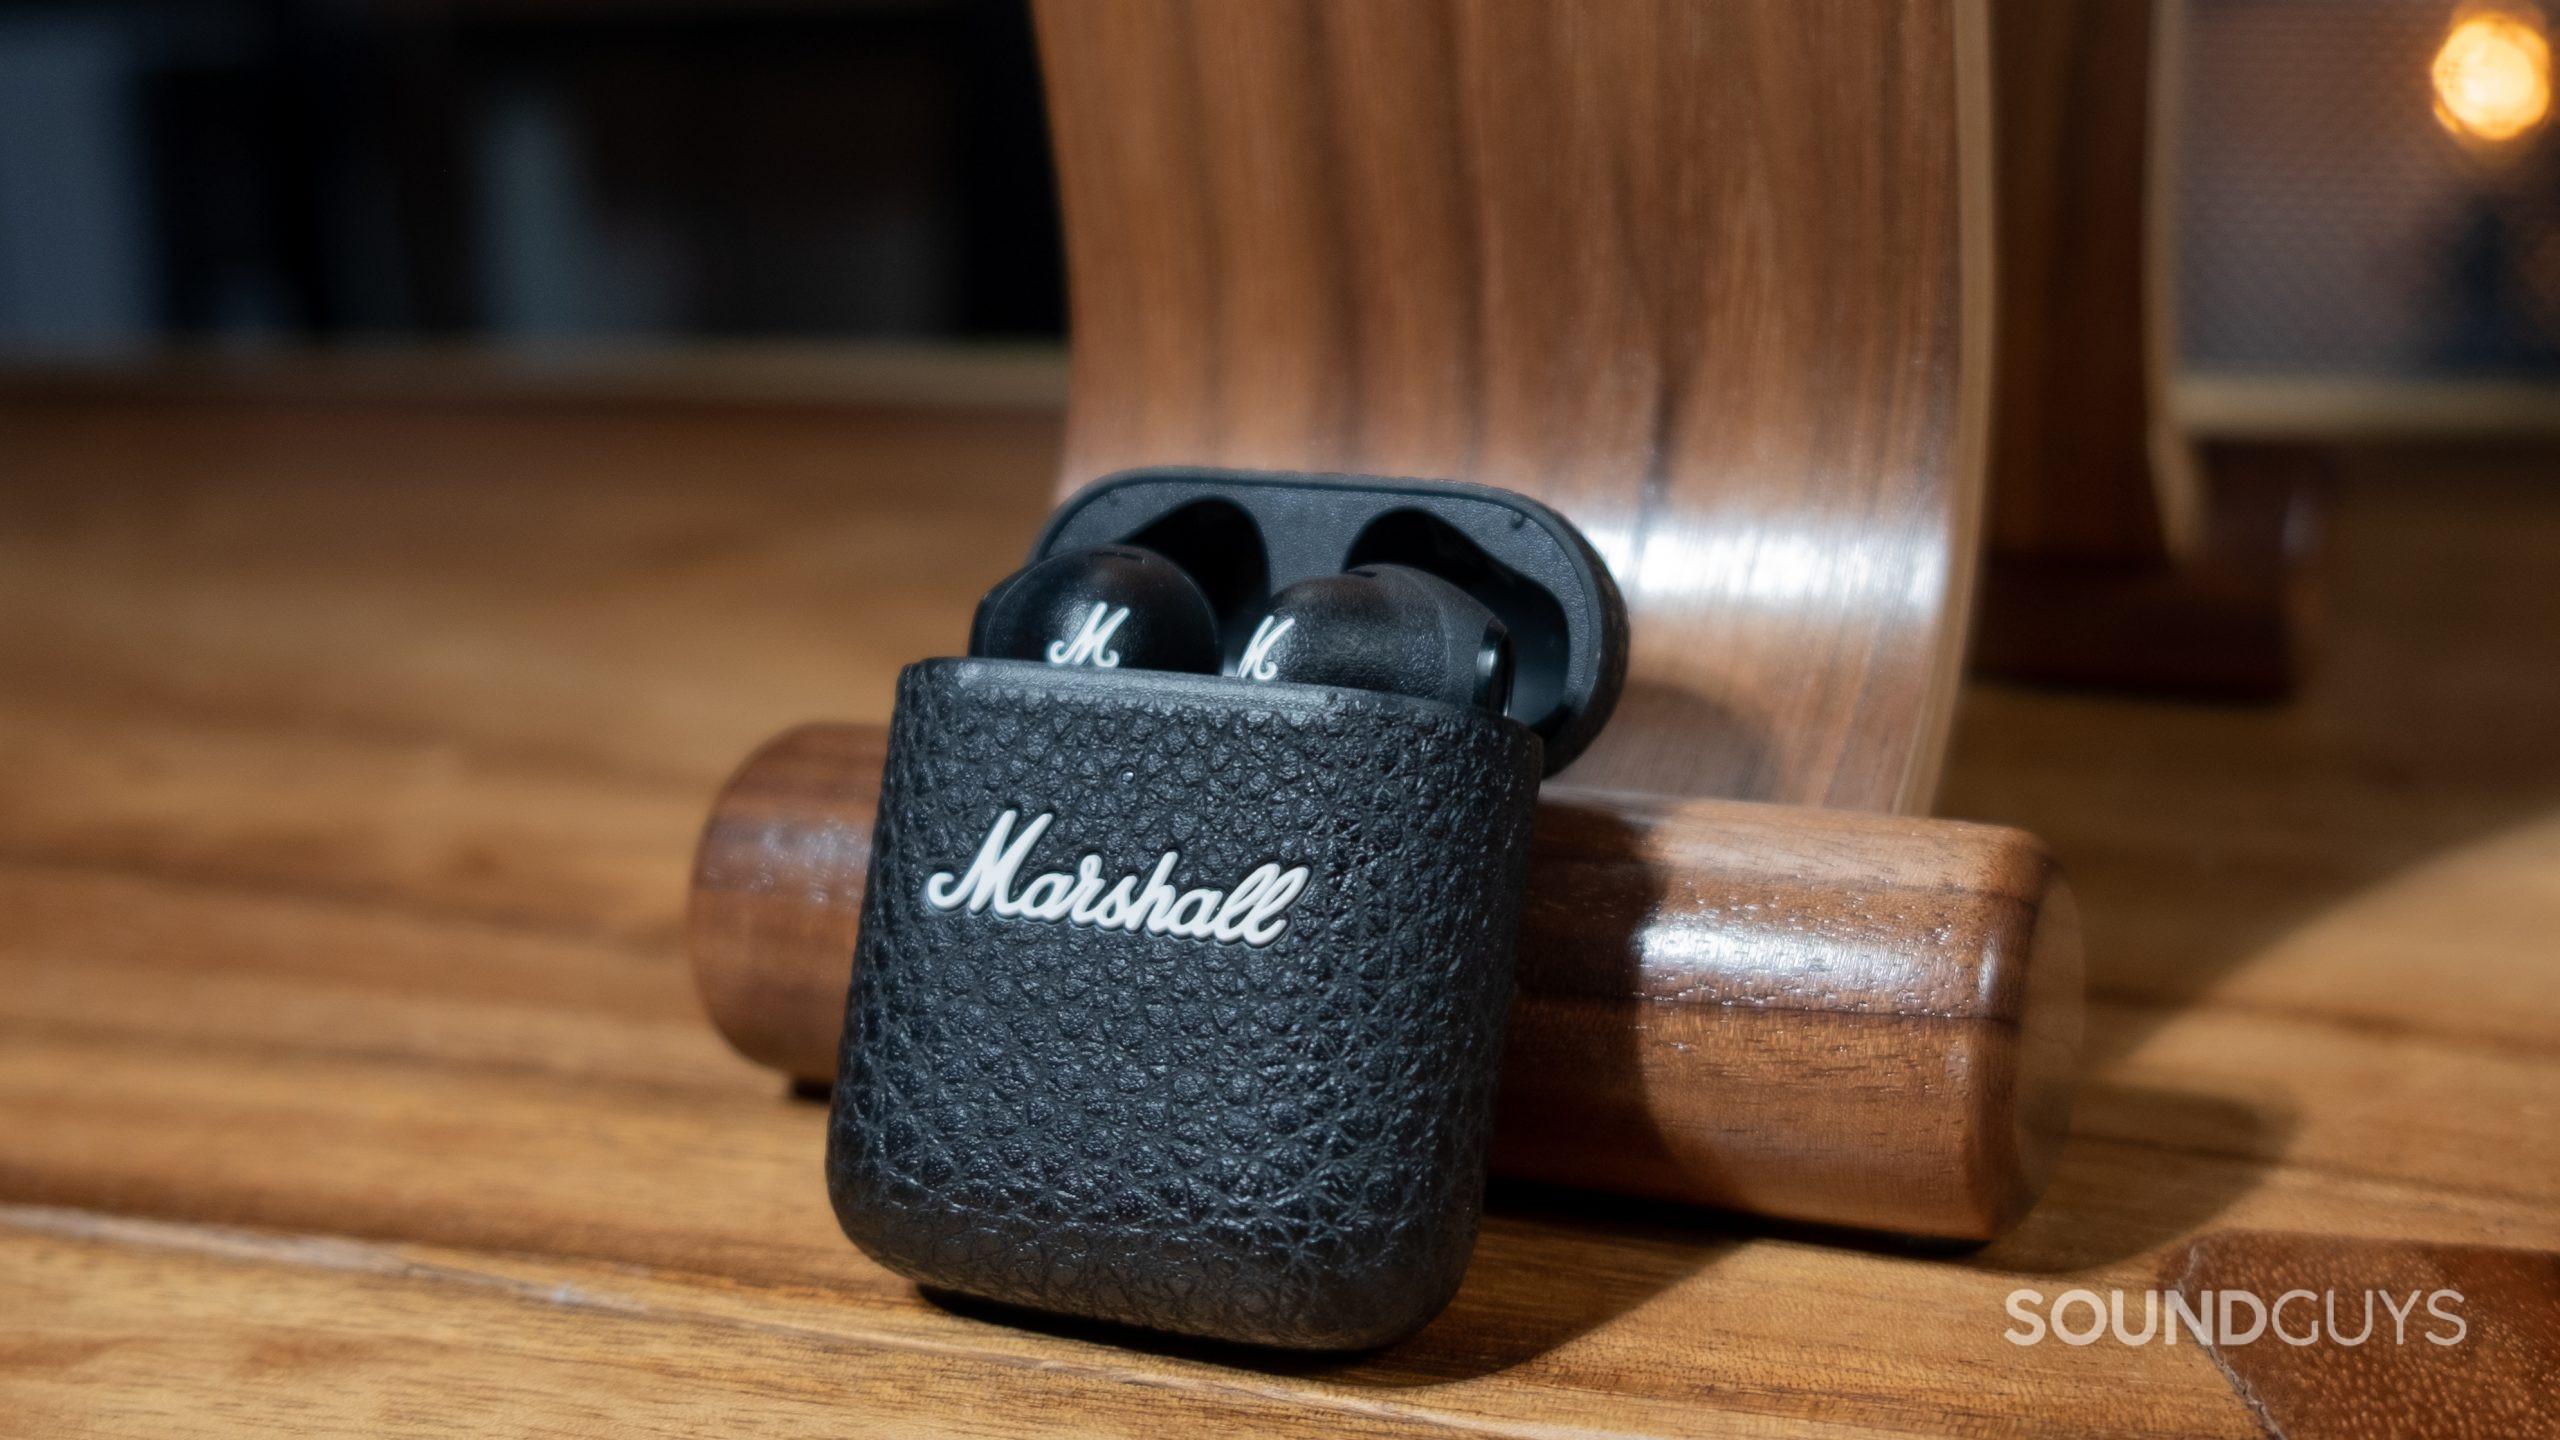 A centered image shows the Marshall Minor III on a wood desk open with the buds showing.